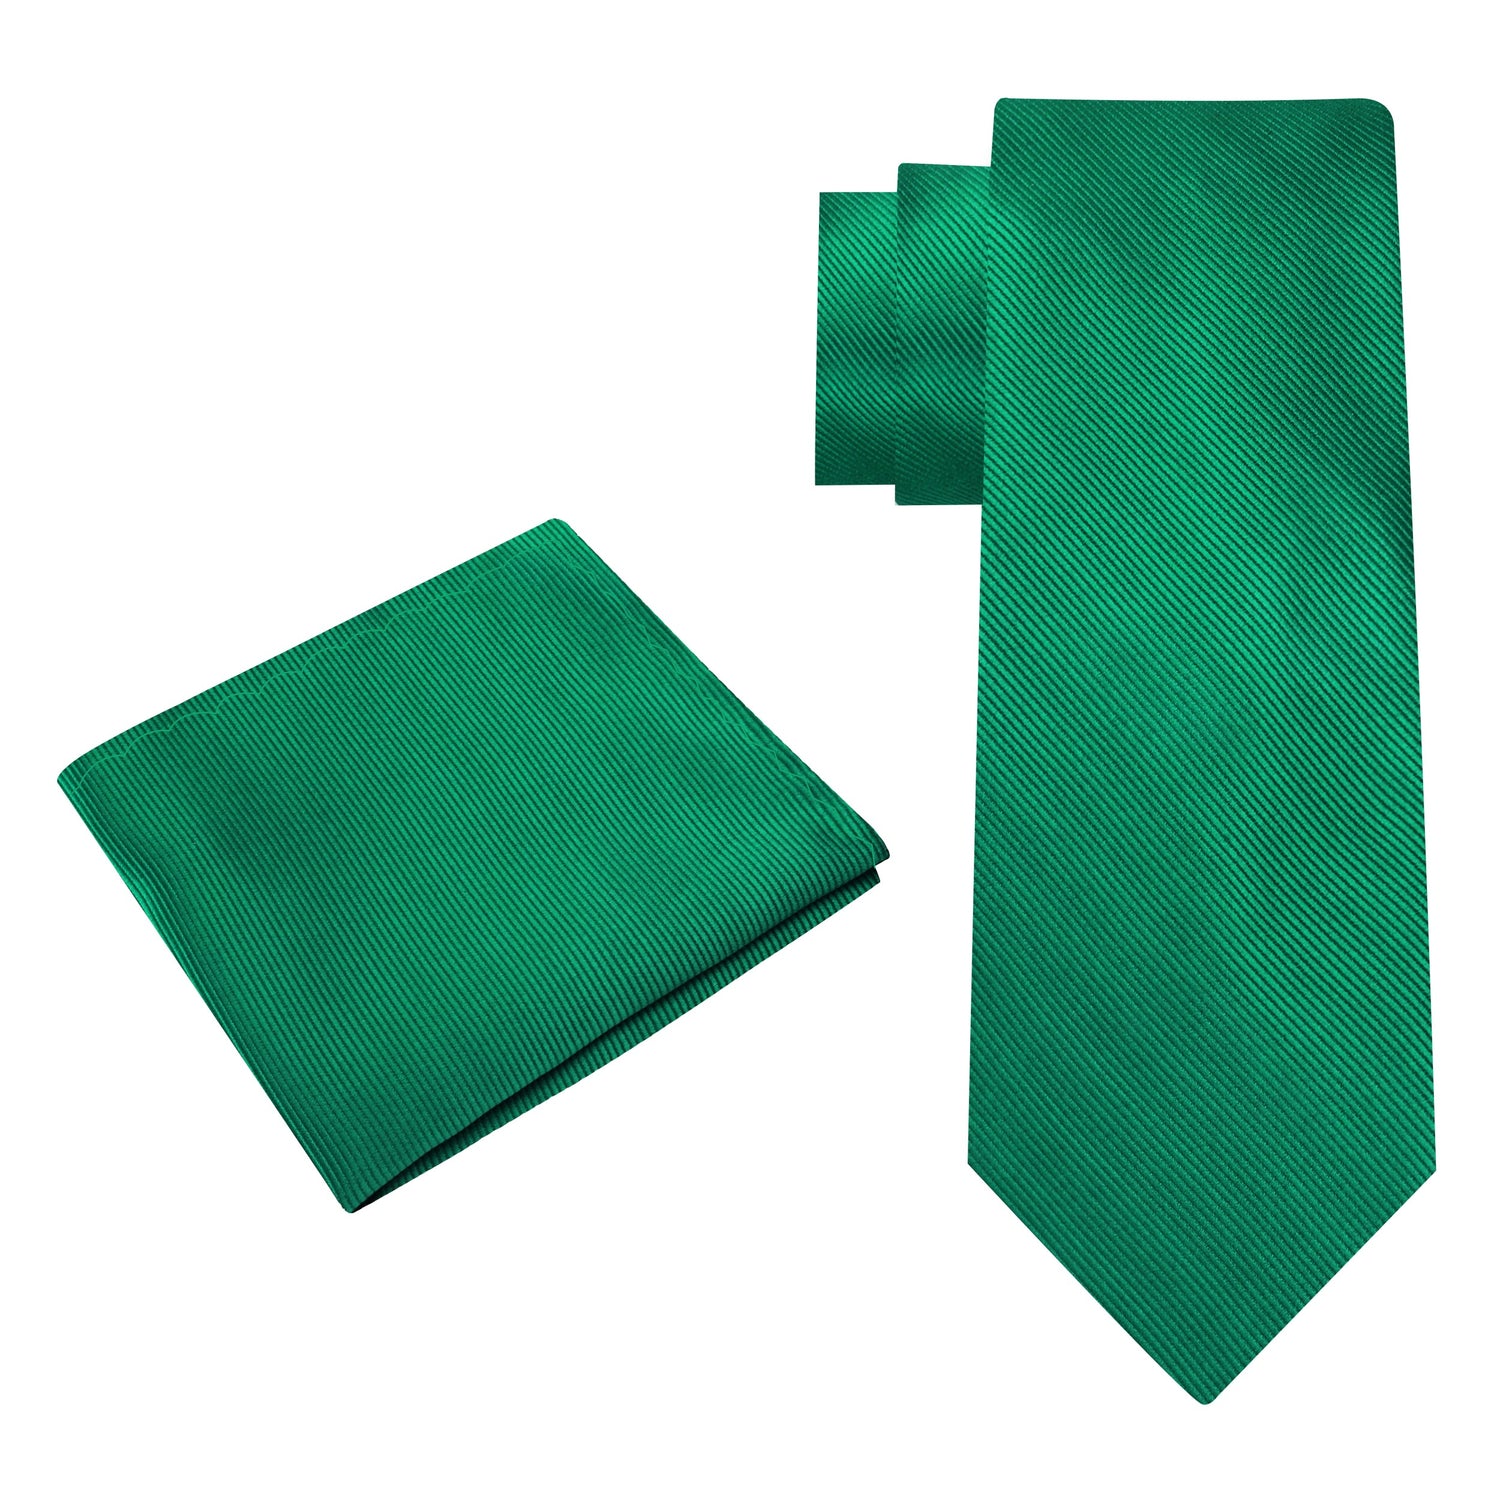 Alt View: Solid Green Necktie with Grey and Square